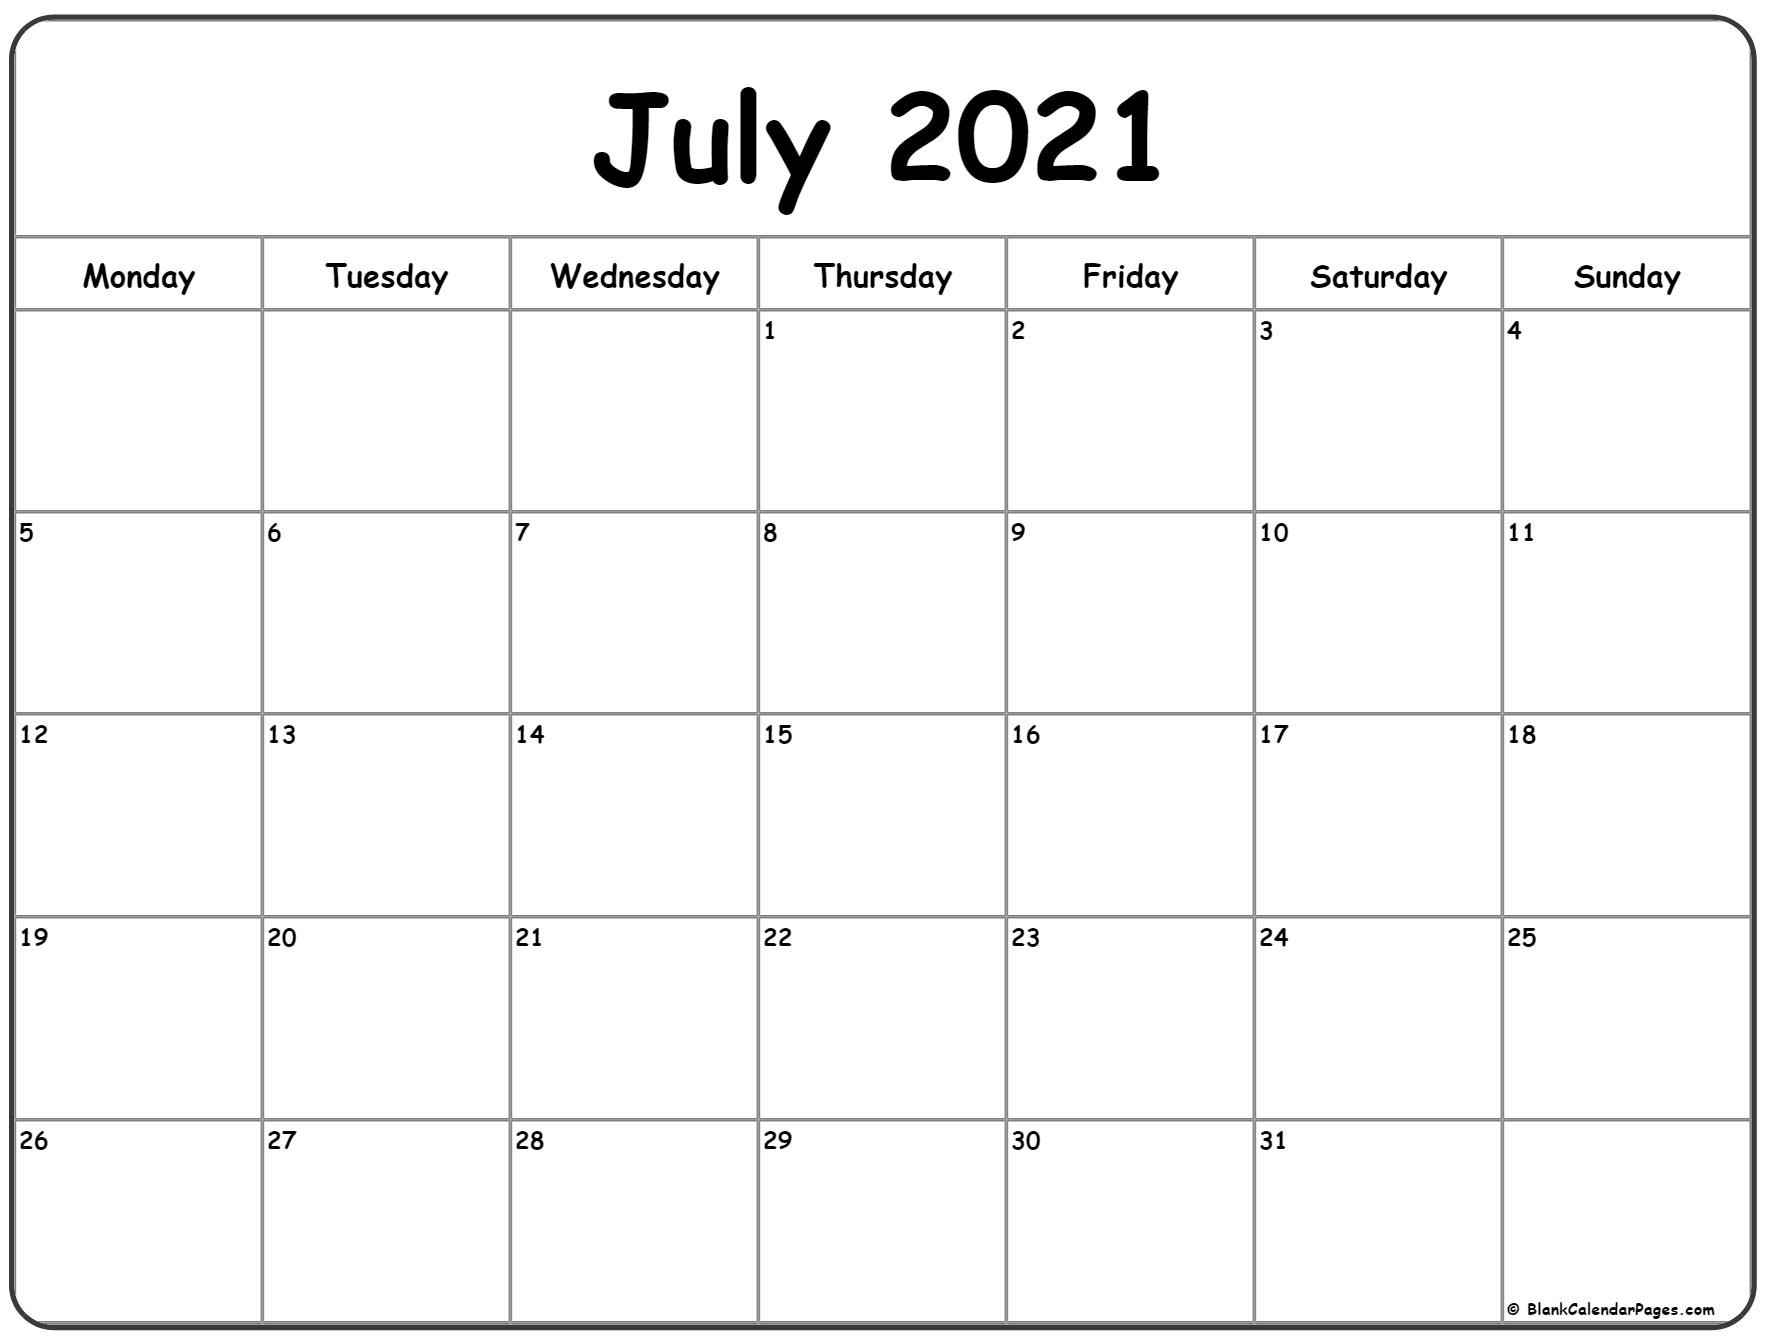 July Calendar 2021 | Free 2021 Printable Calendars  Fiscal Year Calendars Starting With July